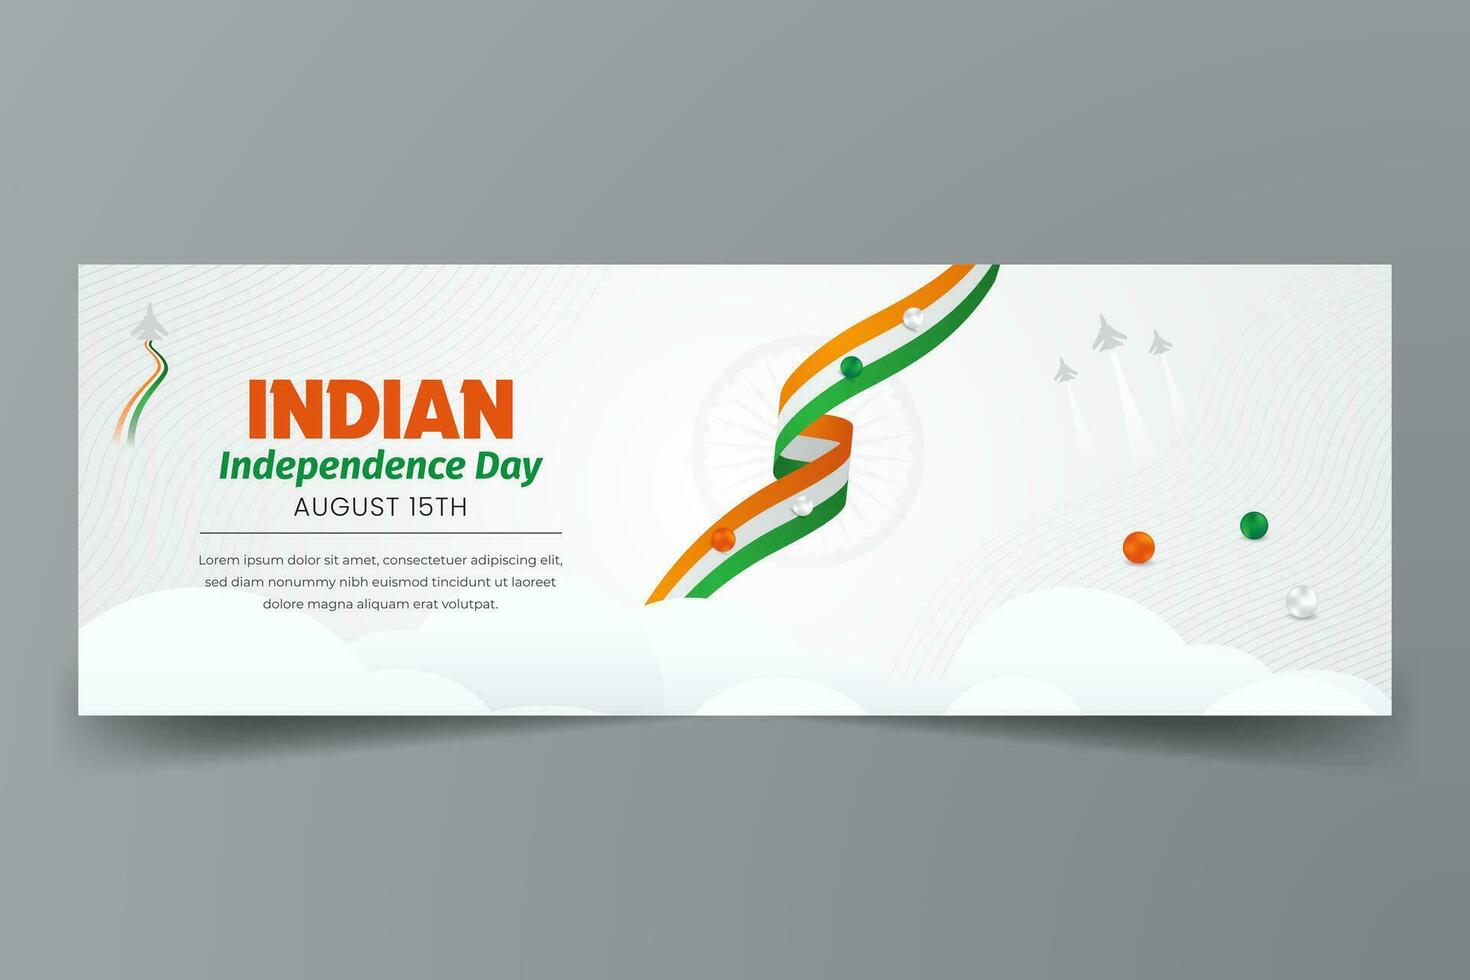 India Independence Day August 15th horizontal banner with ribbon flag illustration vector